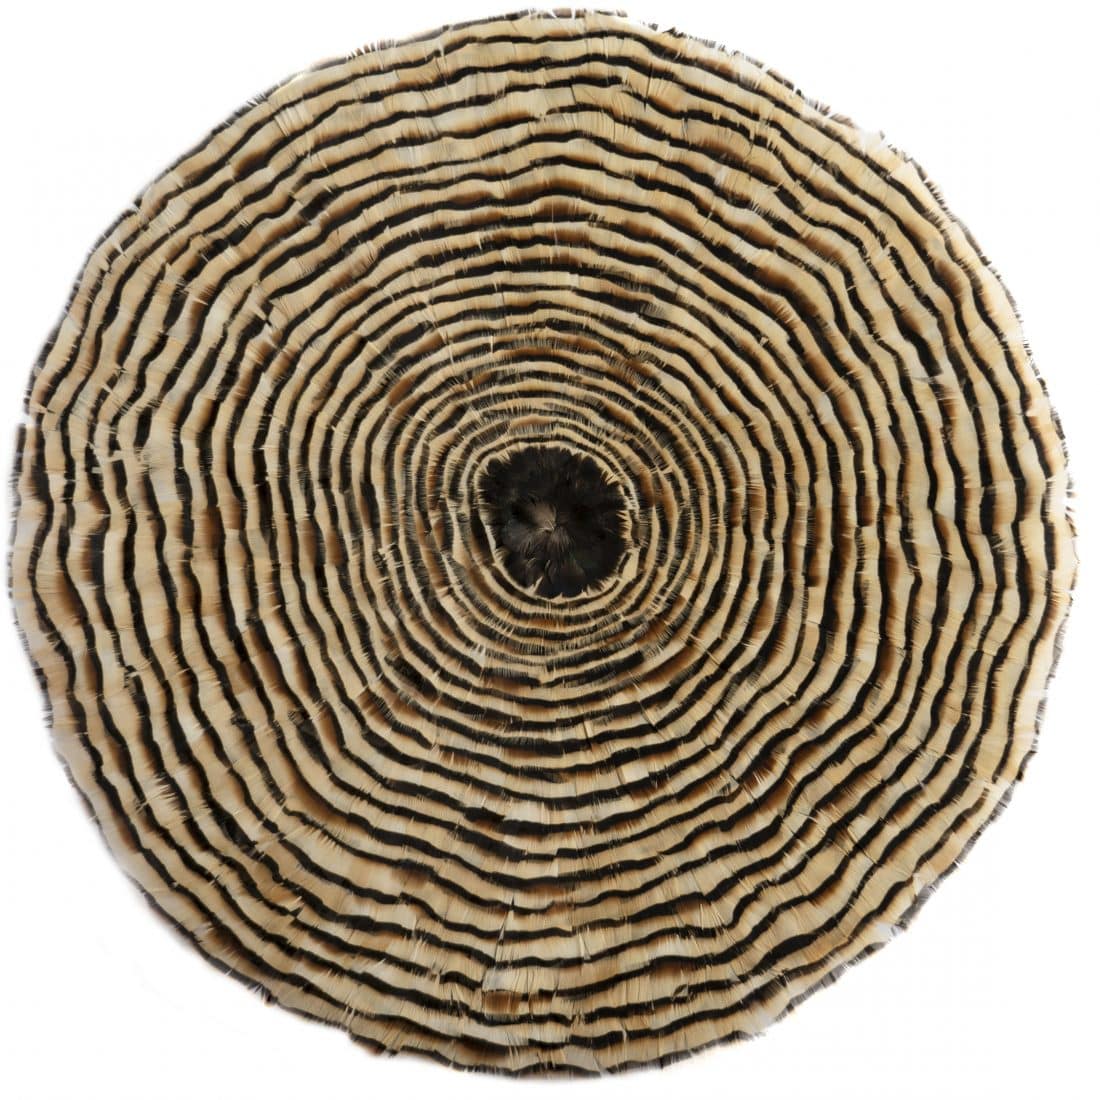 Growth Rings I